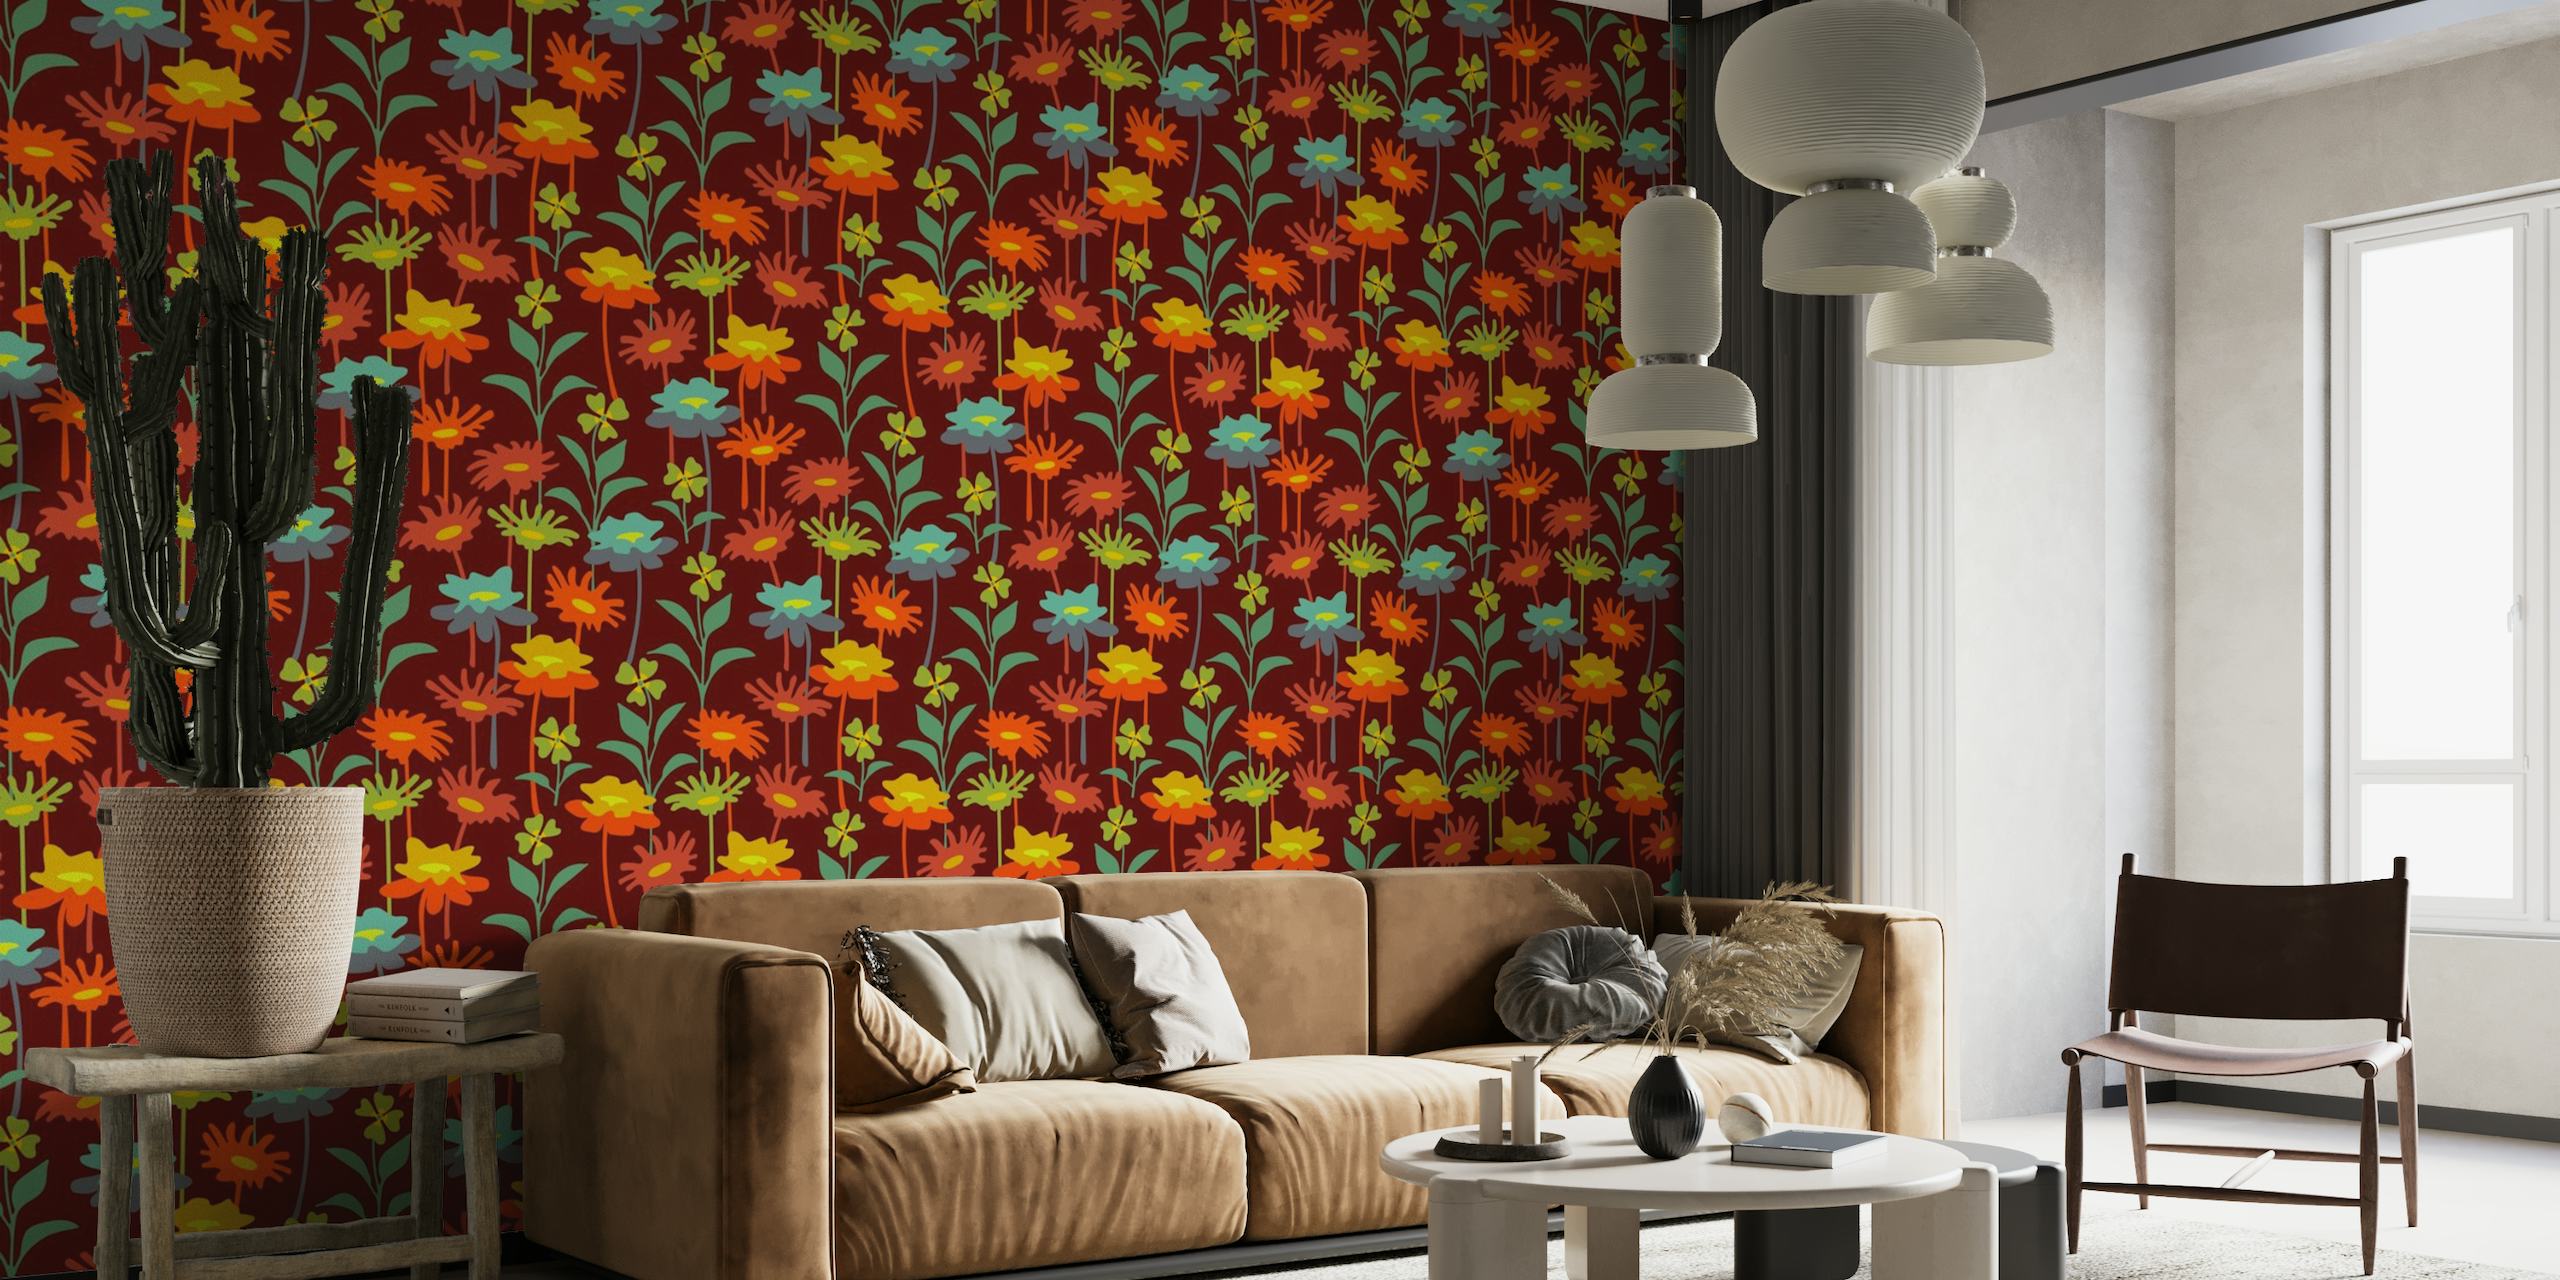 Vintage-inspired floral wall mural with warm sunset colors on a deep red background